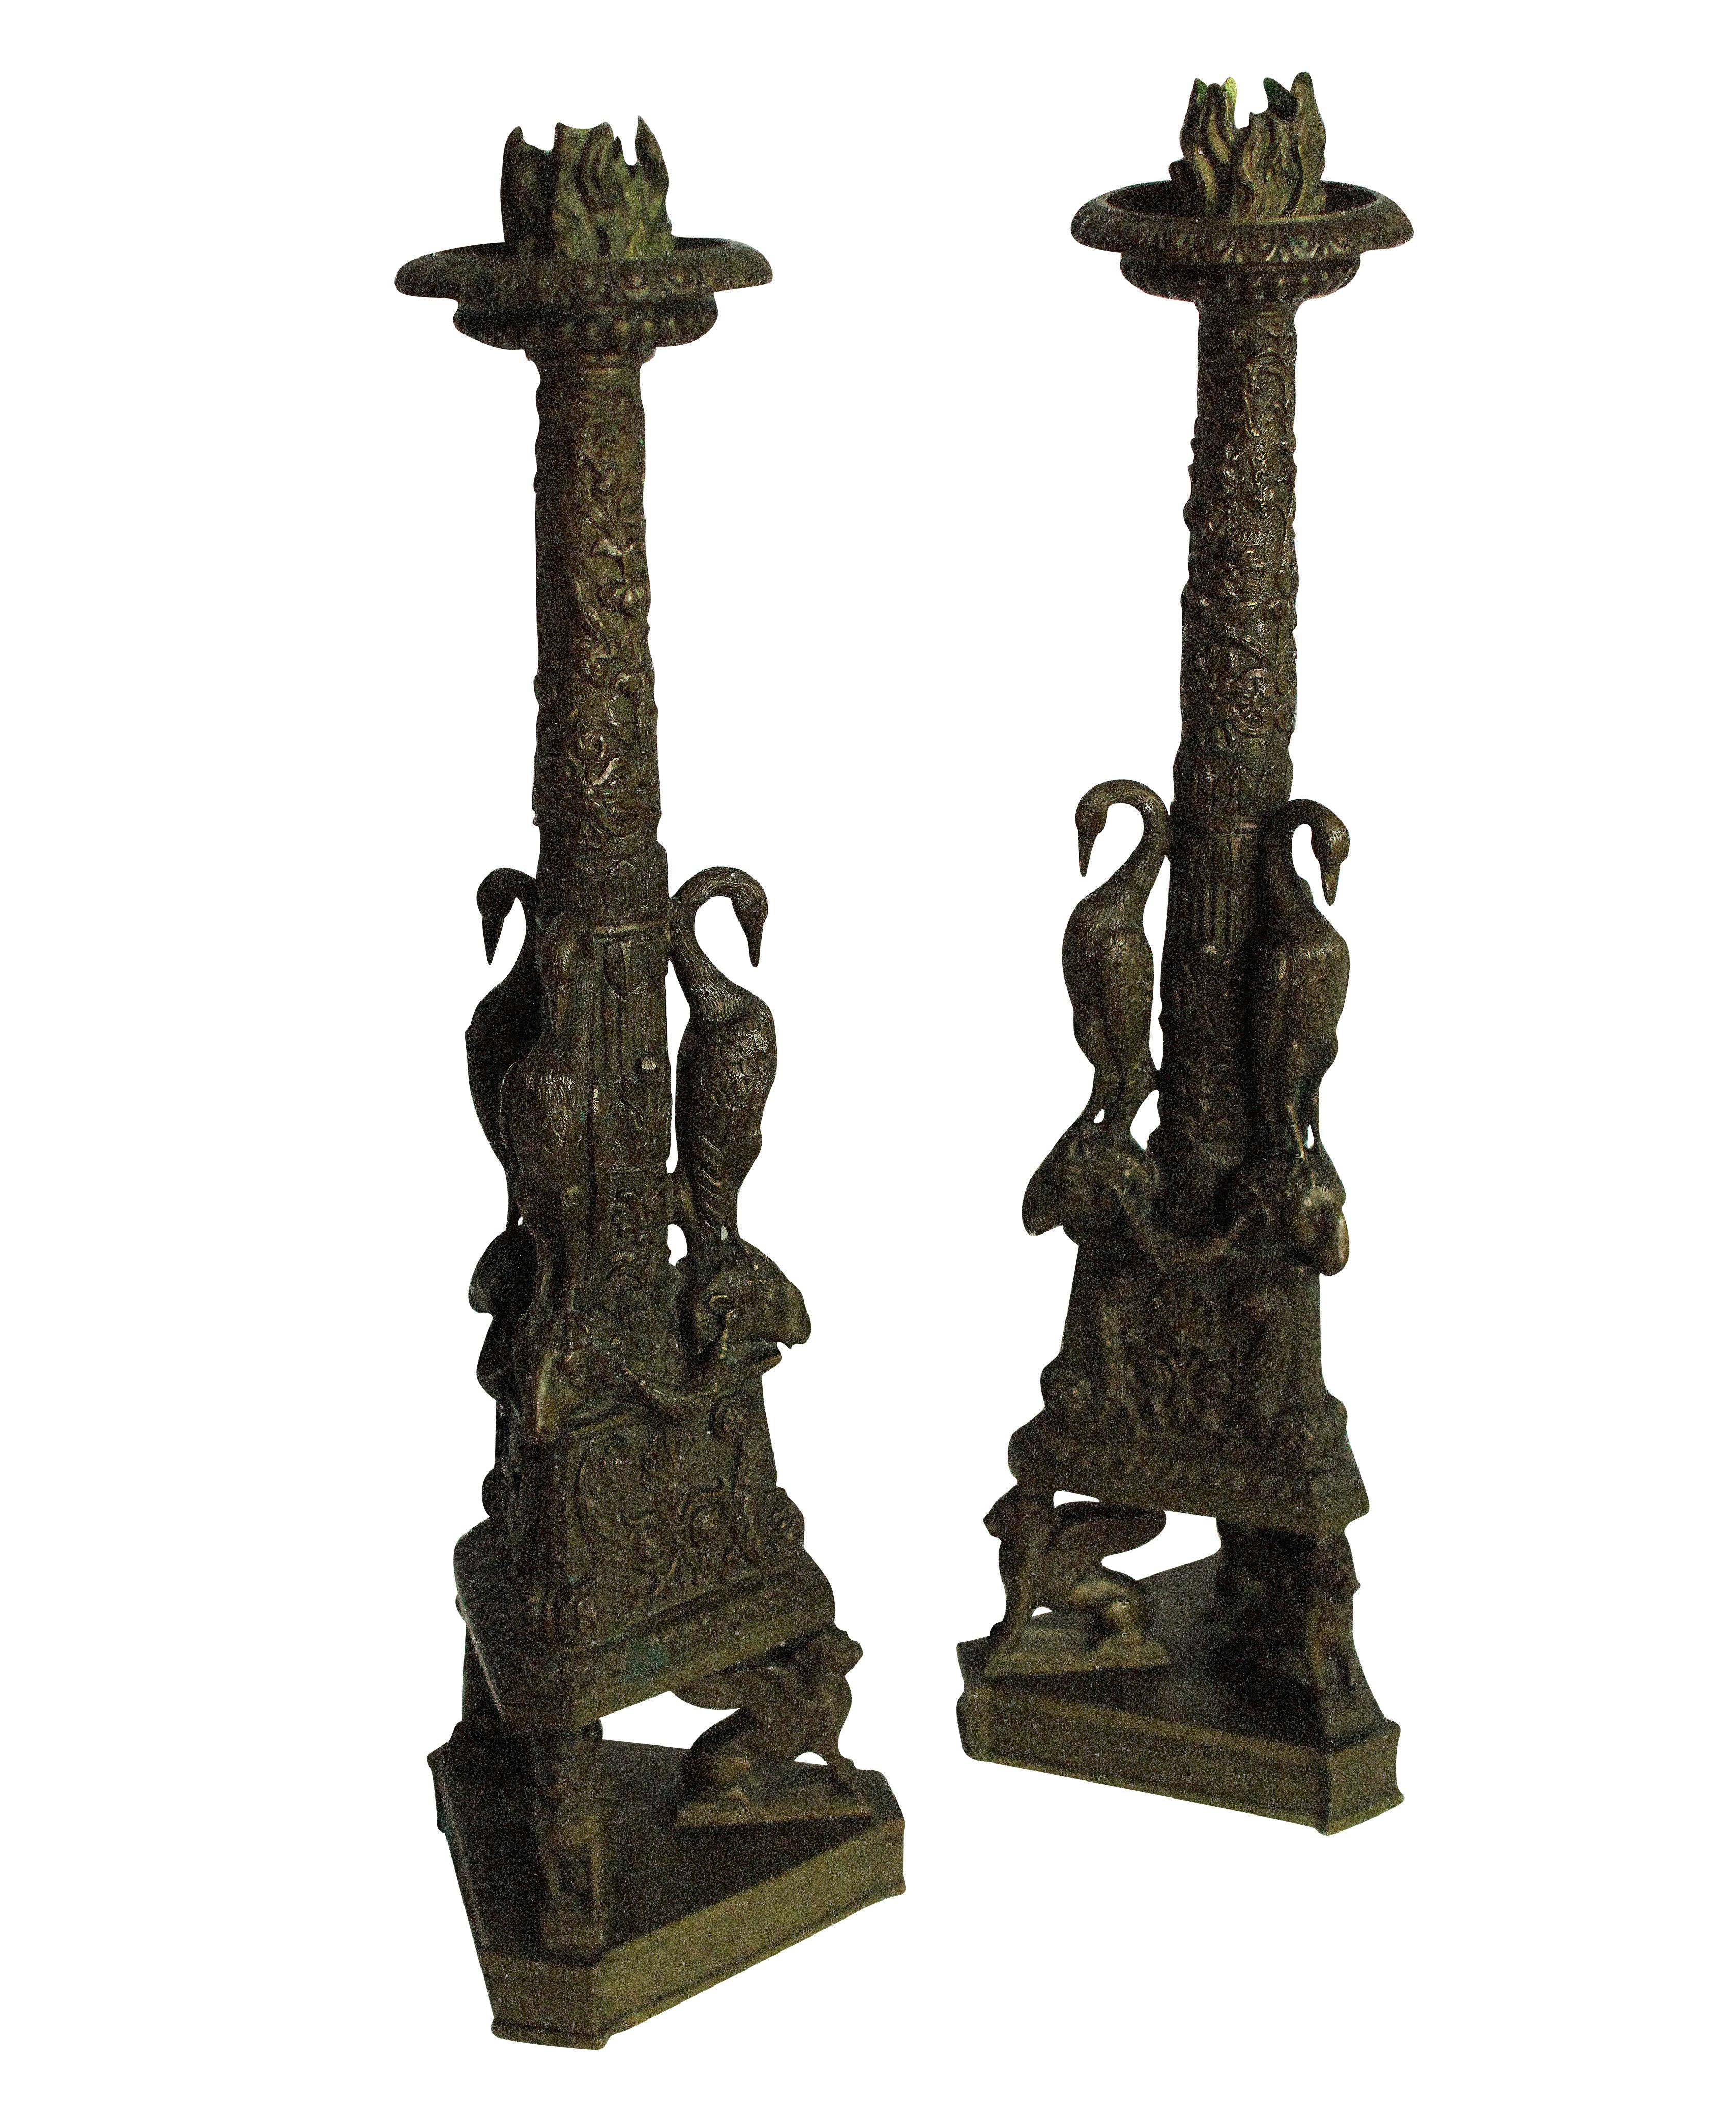 A pair of English bronze candlesticks of fine quality, after the design by Giovanni Battista Piranesi.